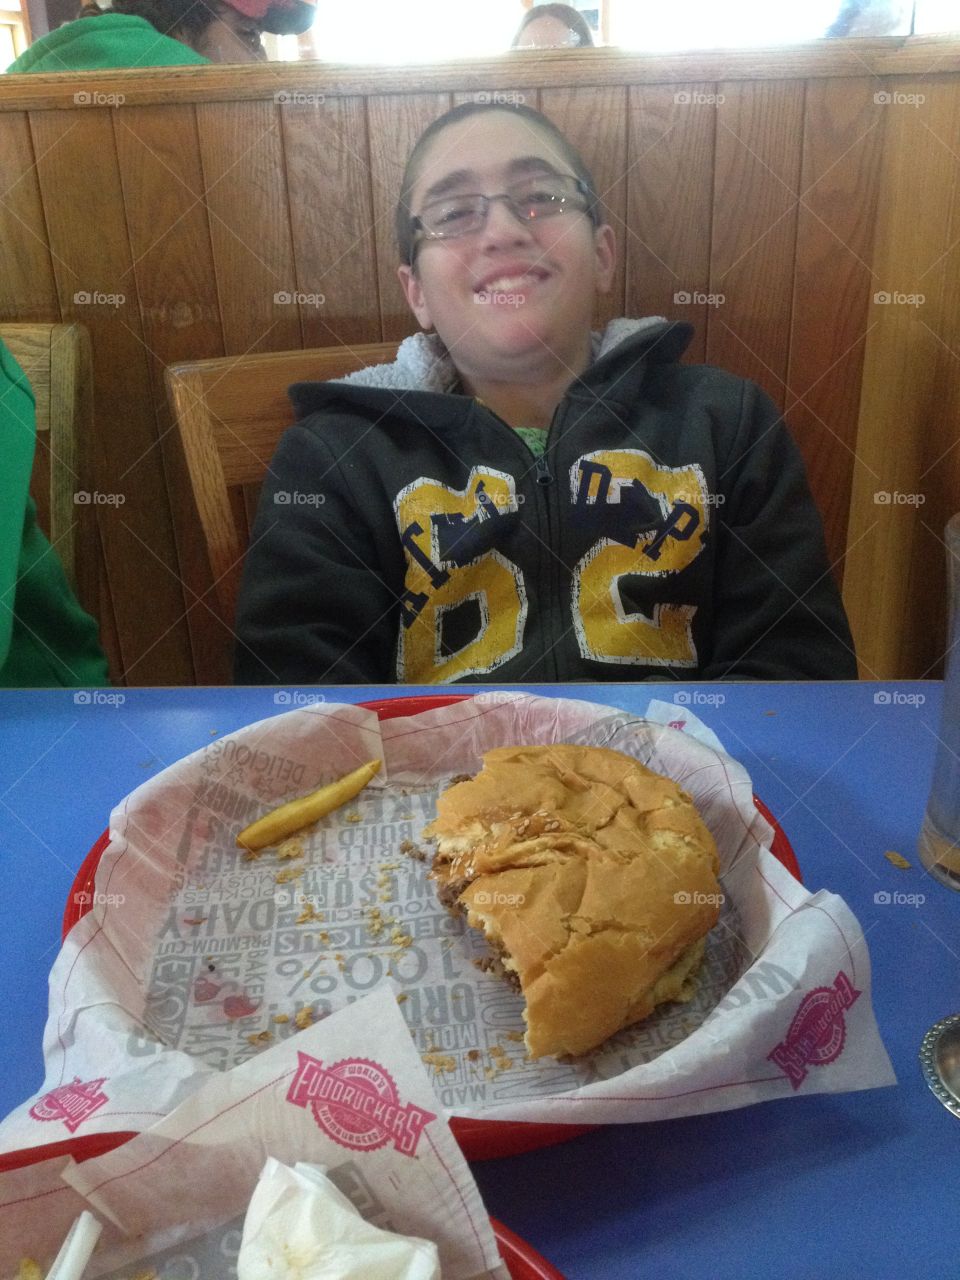 Defeated by a giant burger 